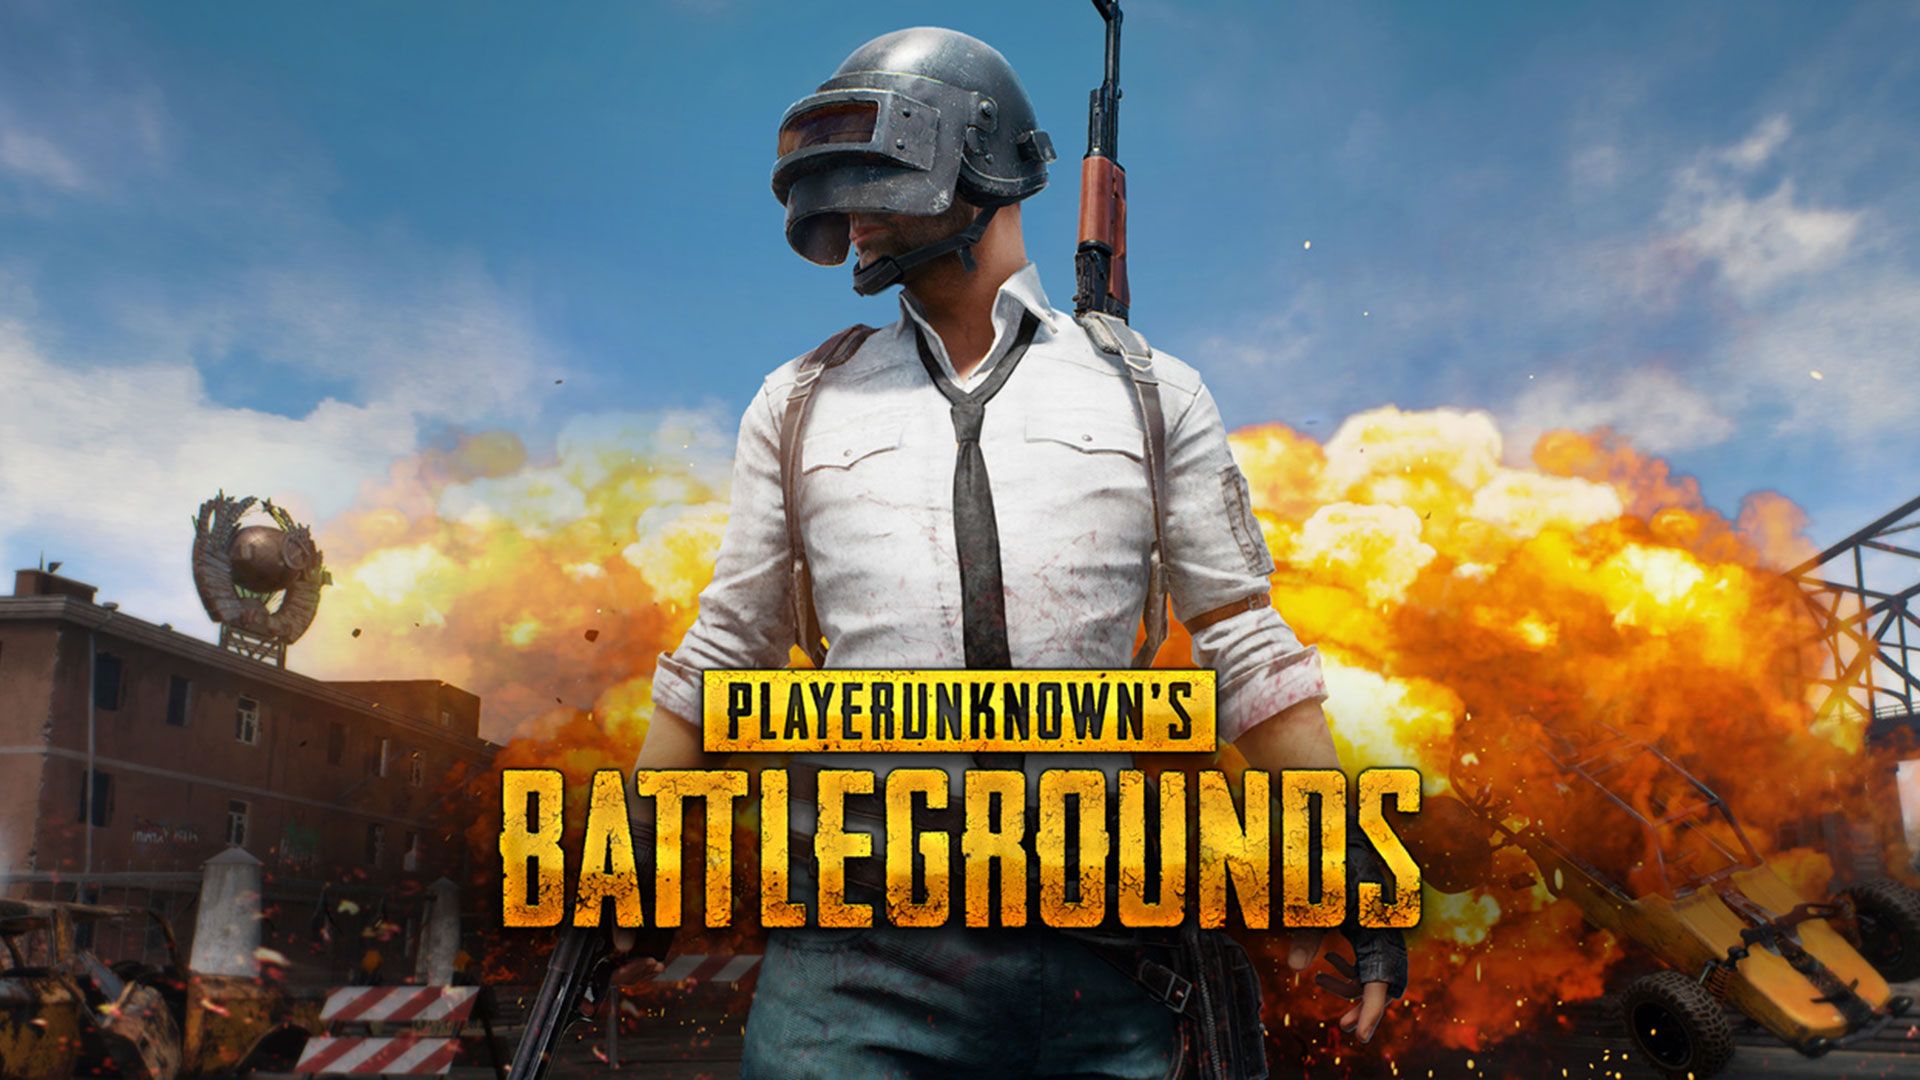 BATTLEGROUNDS is a battle royale shooter that pits 100 players against each other in a struggle for survival.